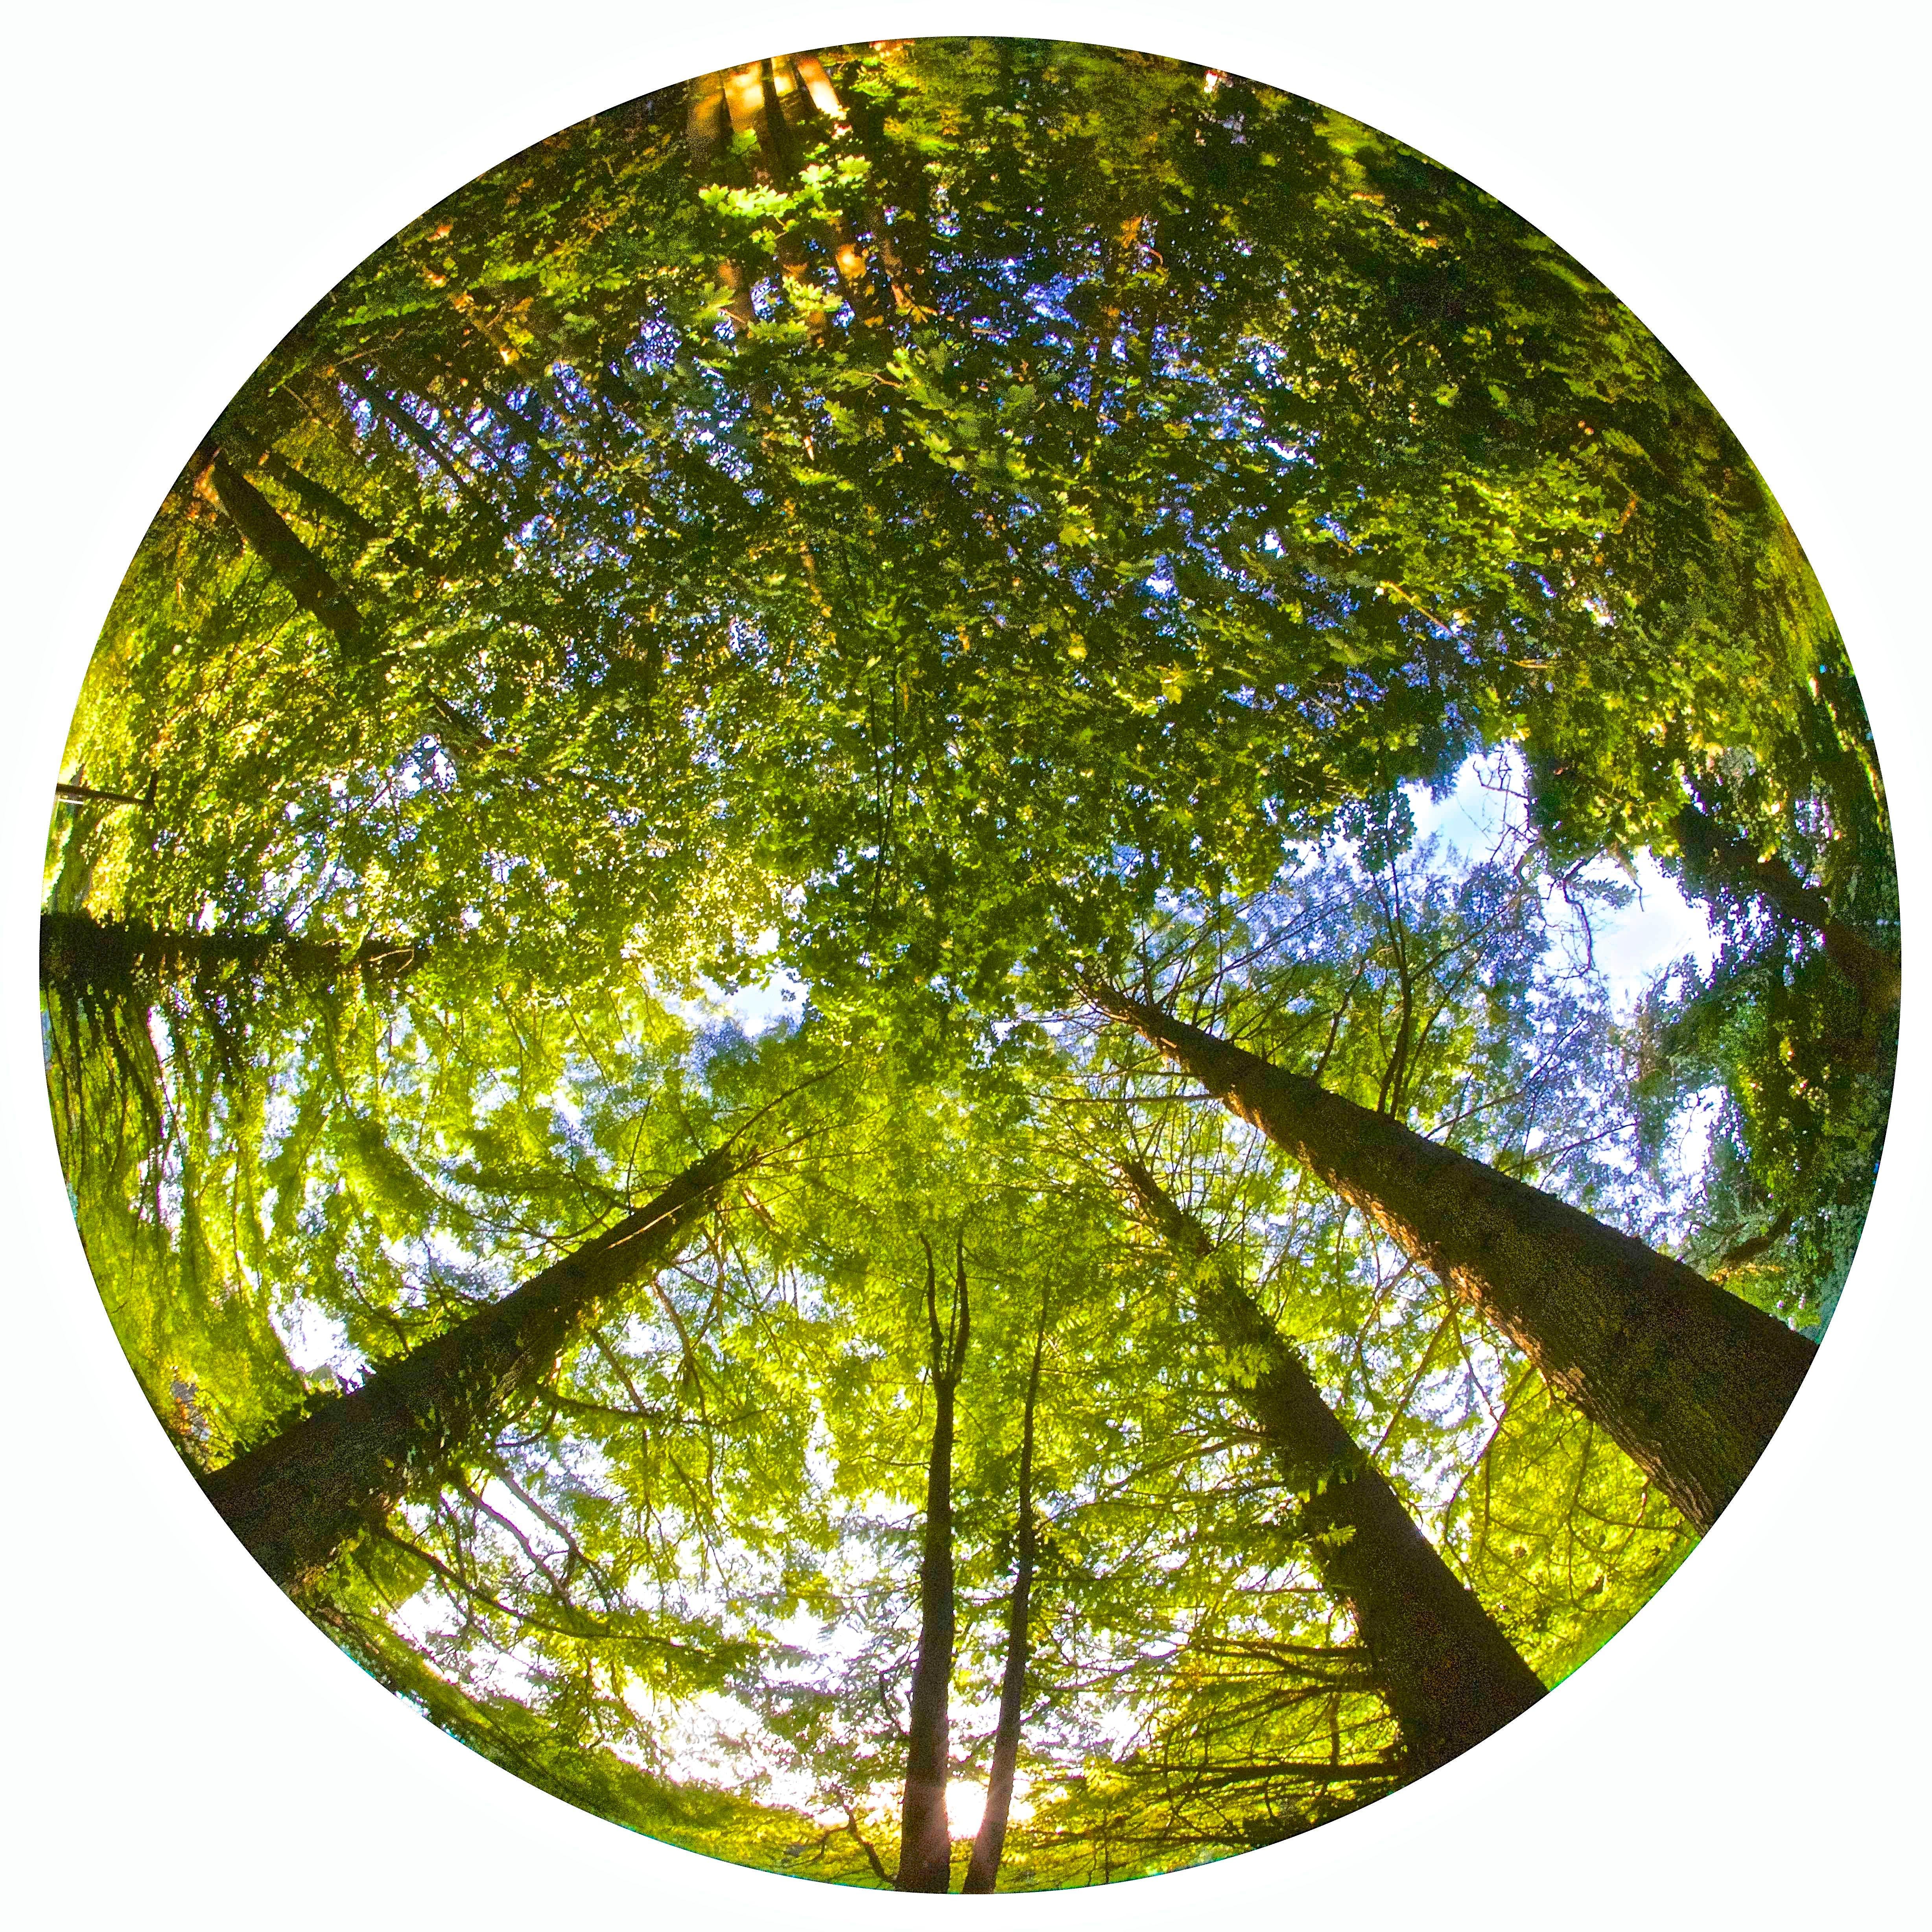 Philip Shalam Abstract Photograph - SUMMER TREES - CONTEMPORARY PHOTO - COLOUR PHOTO - FISHEYE - NATURE - TREES